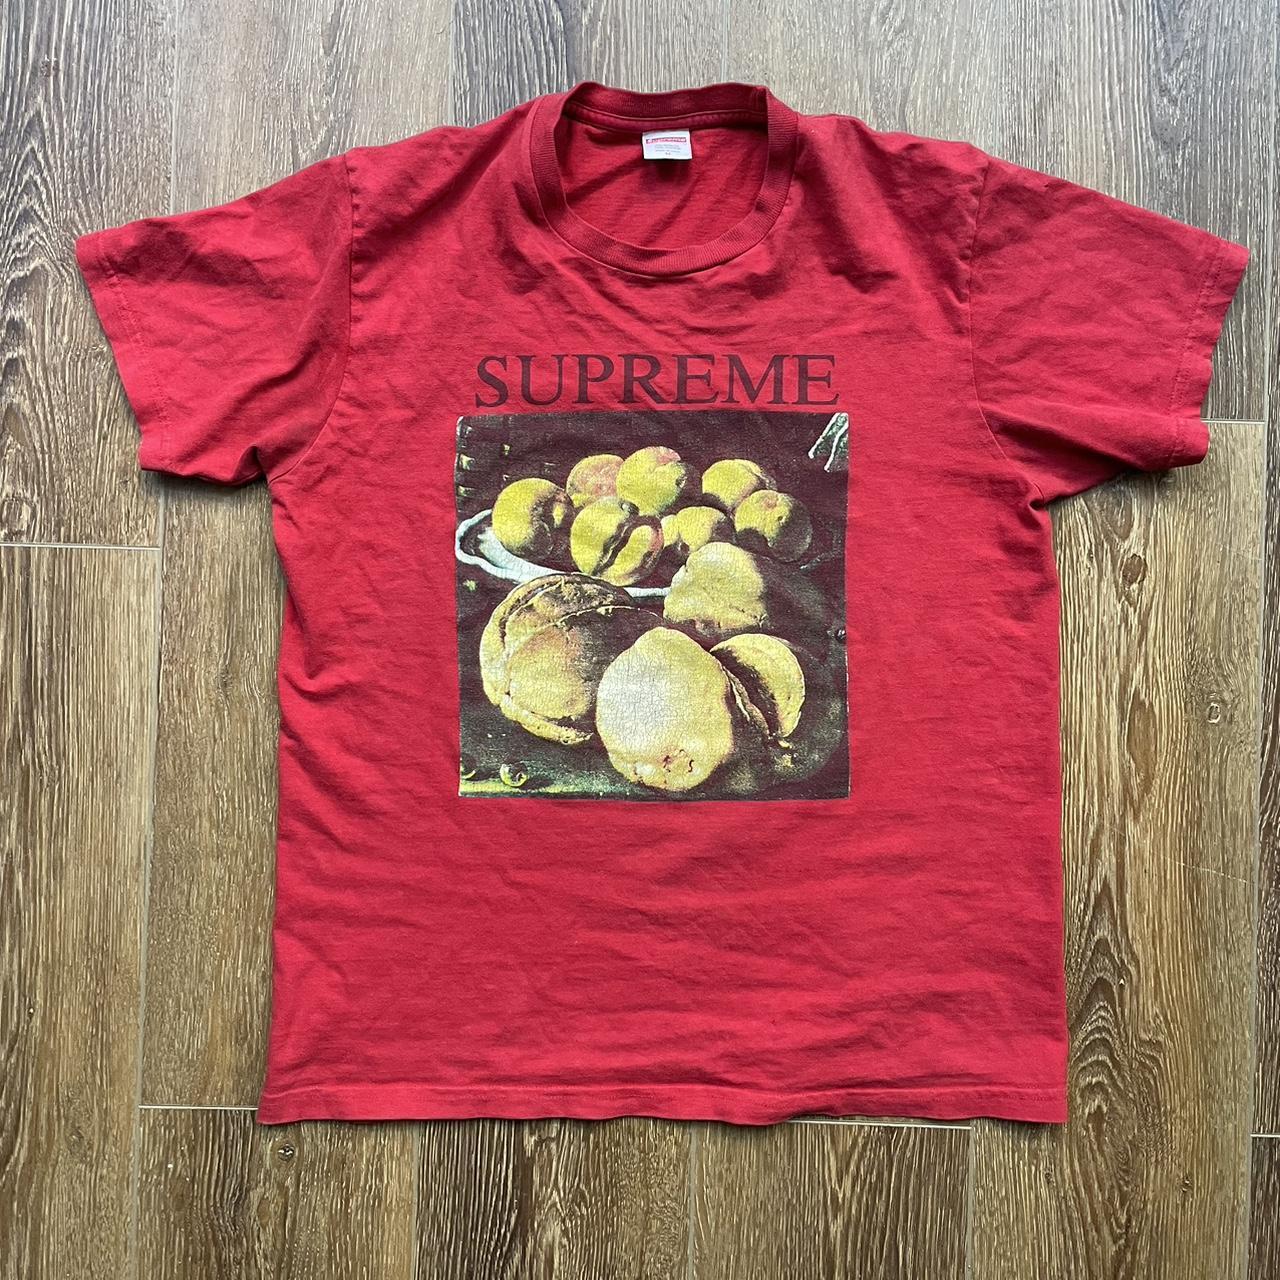 Supreme Men's Grey and Red T-shirt